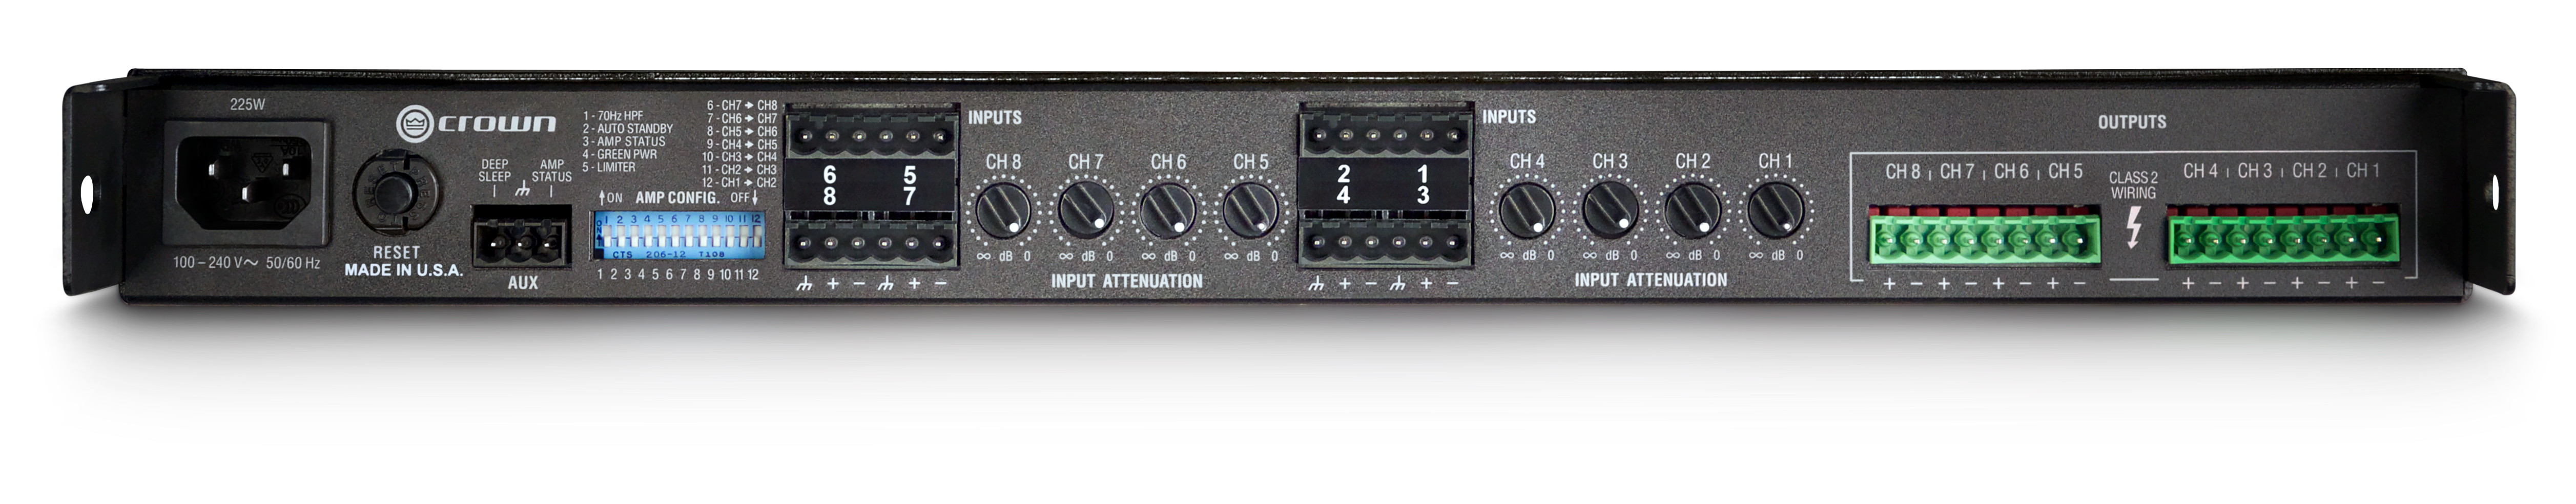 Crown CT 875 8-Channel, 75 W at 4 Ohm Power Amplifier